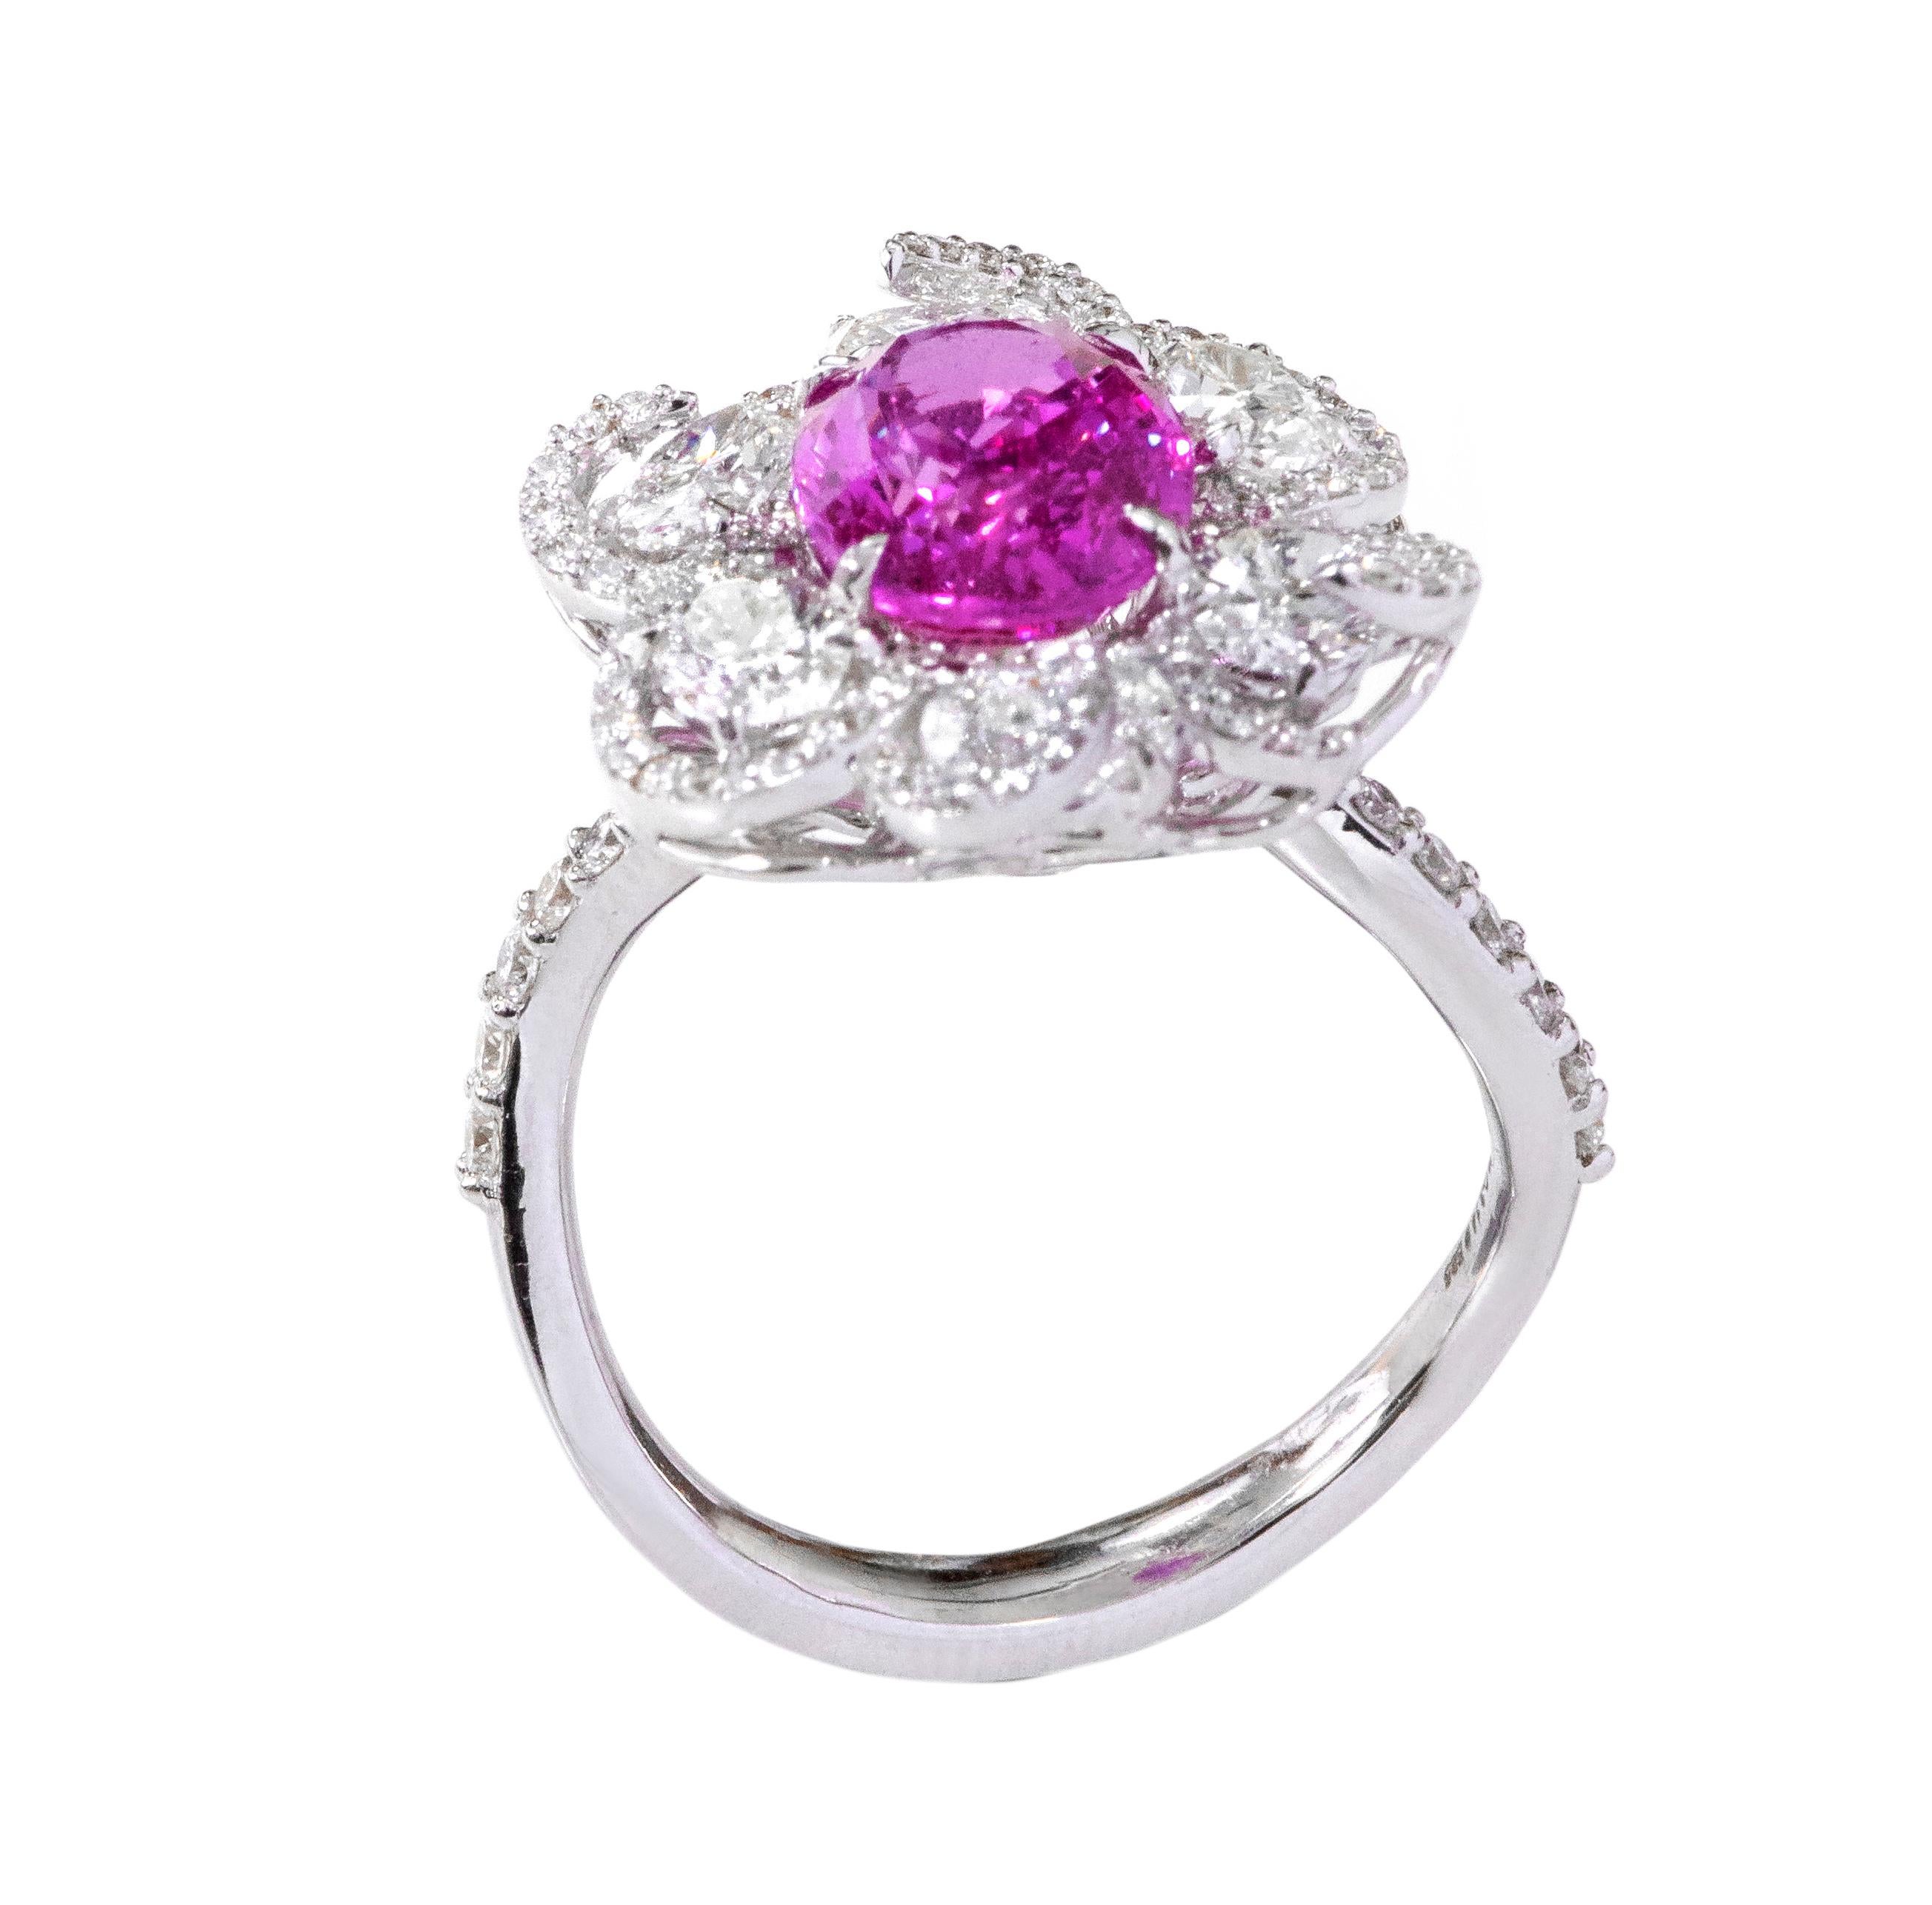 Women's 18 Karat White Gold 3.14 Carat Solitaire Pink-Sapphire and Diamond Cocktail Ring For Sale